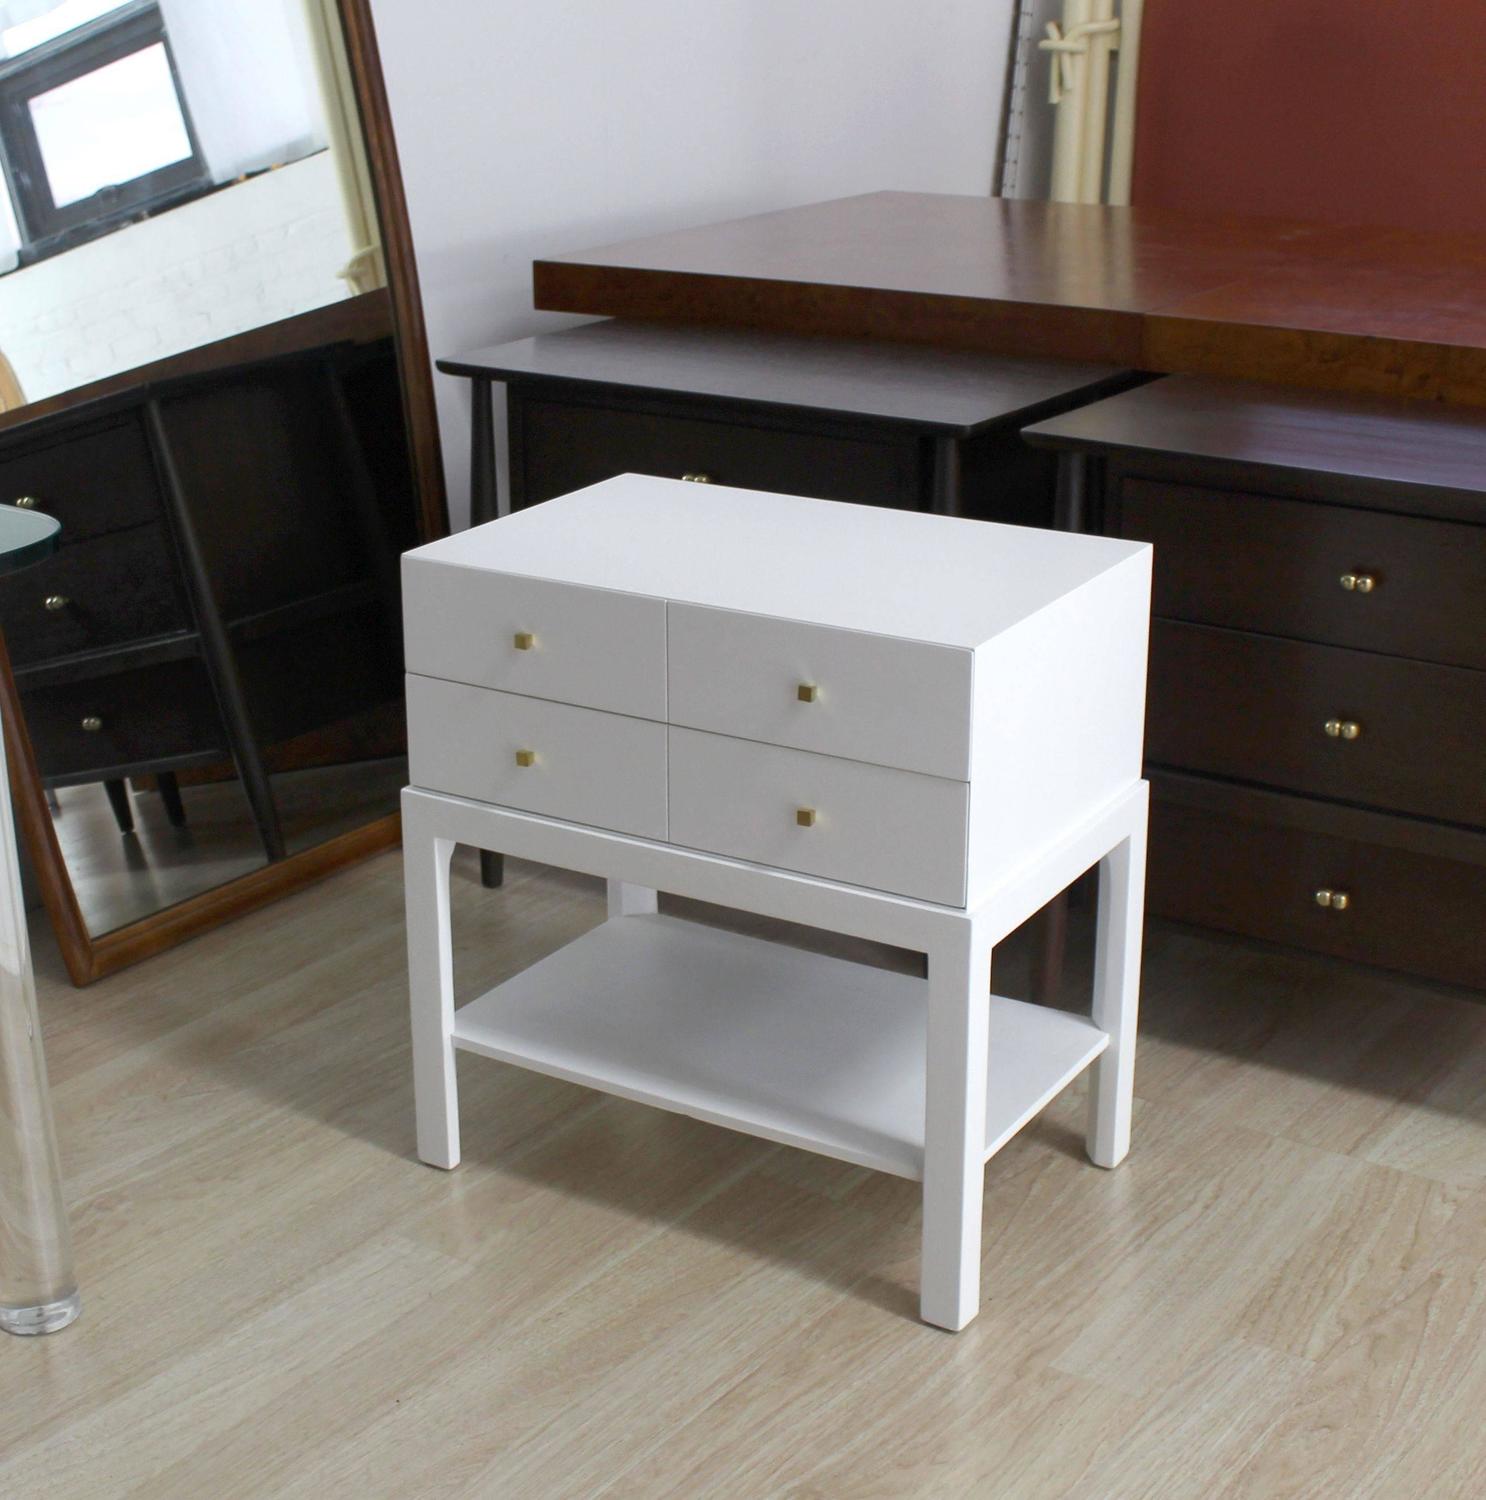 White Lacquer Diamond Shape Brass Pulls TwoDrawer Nightstand For Sale at 1stdibs